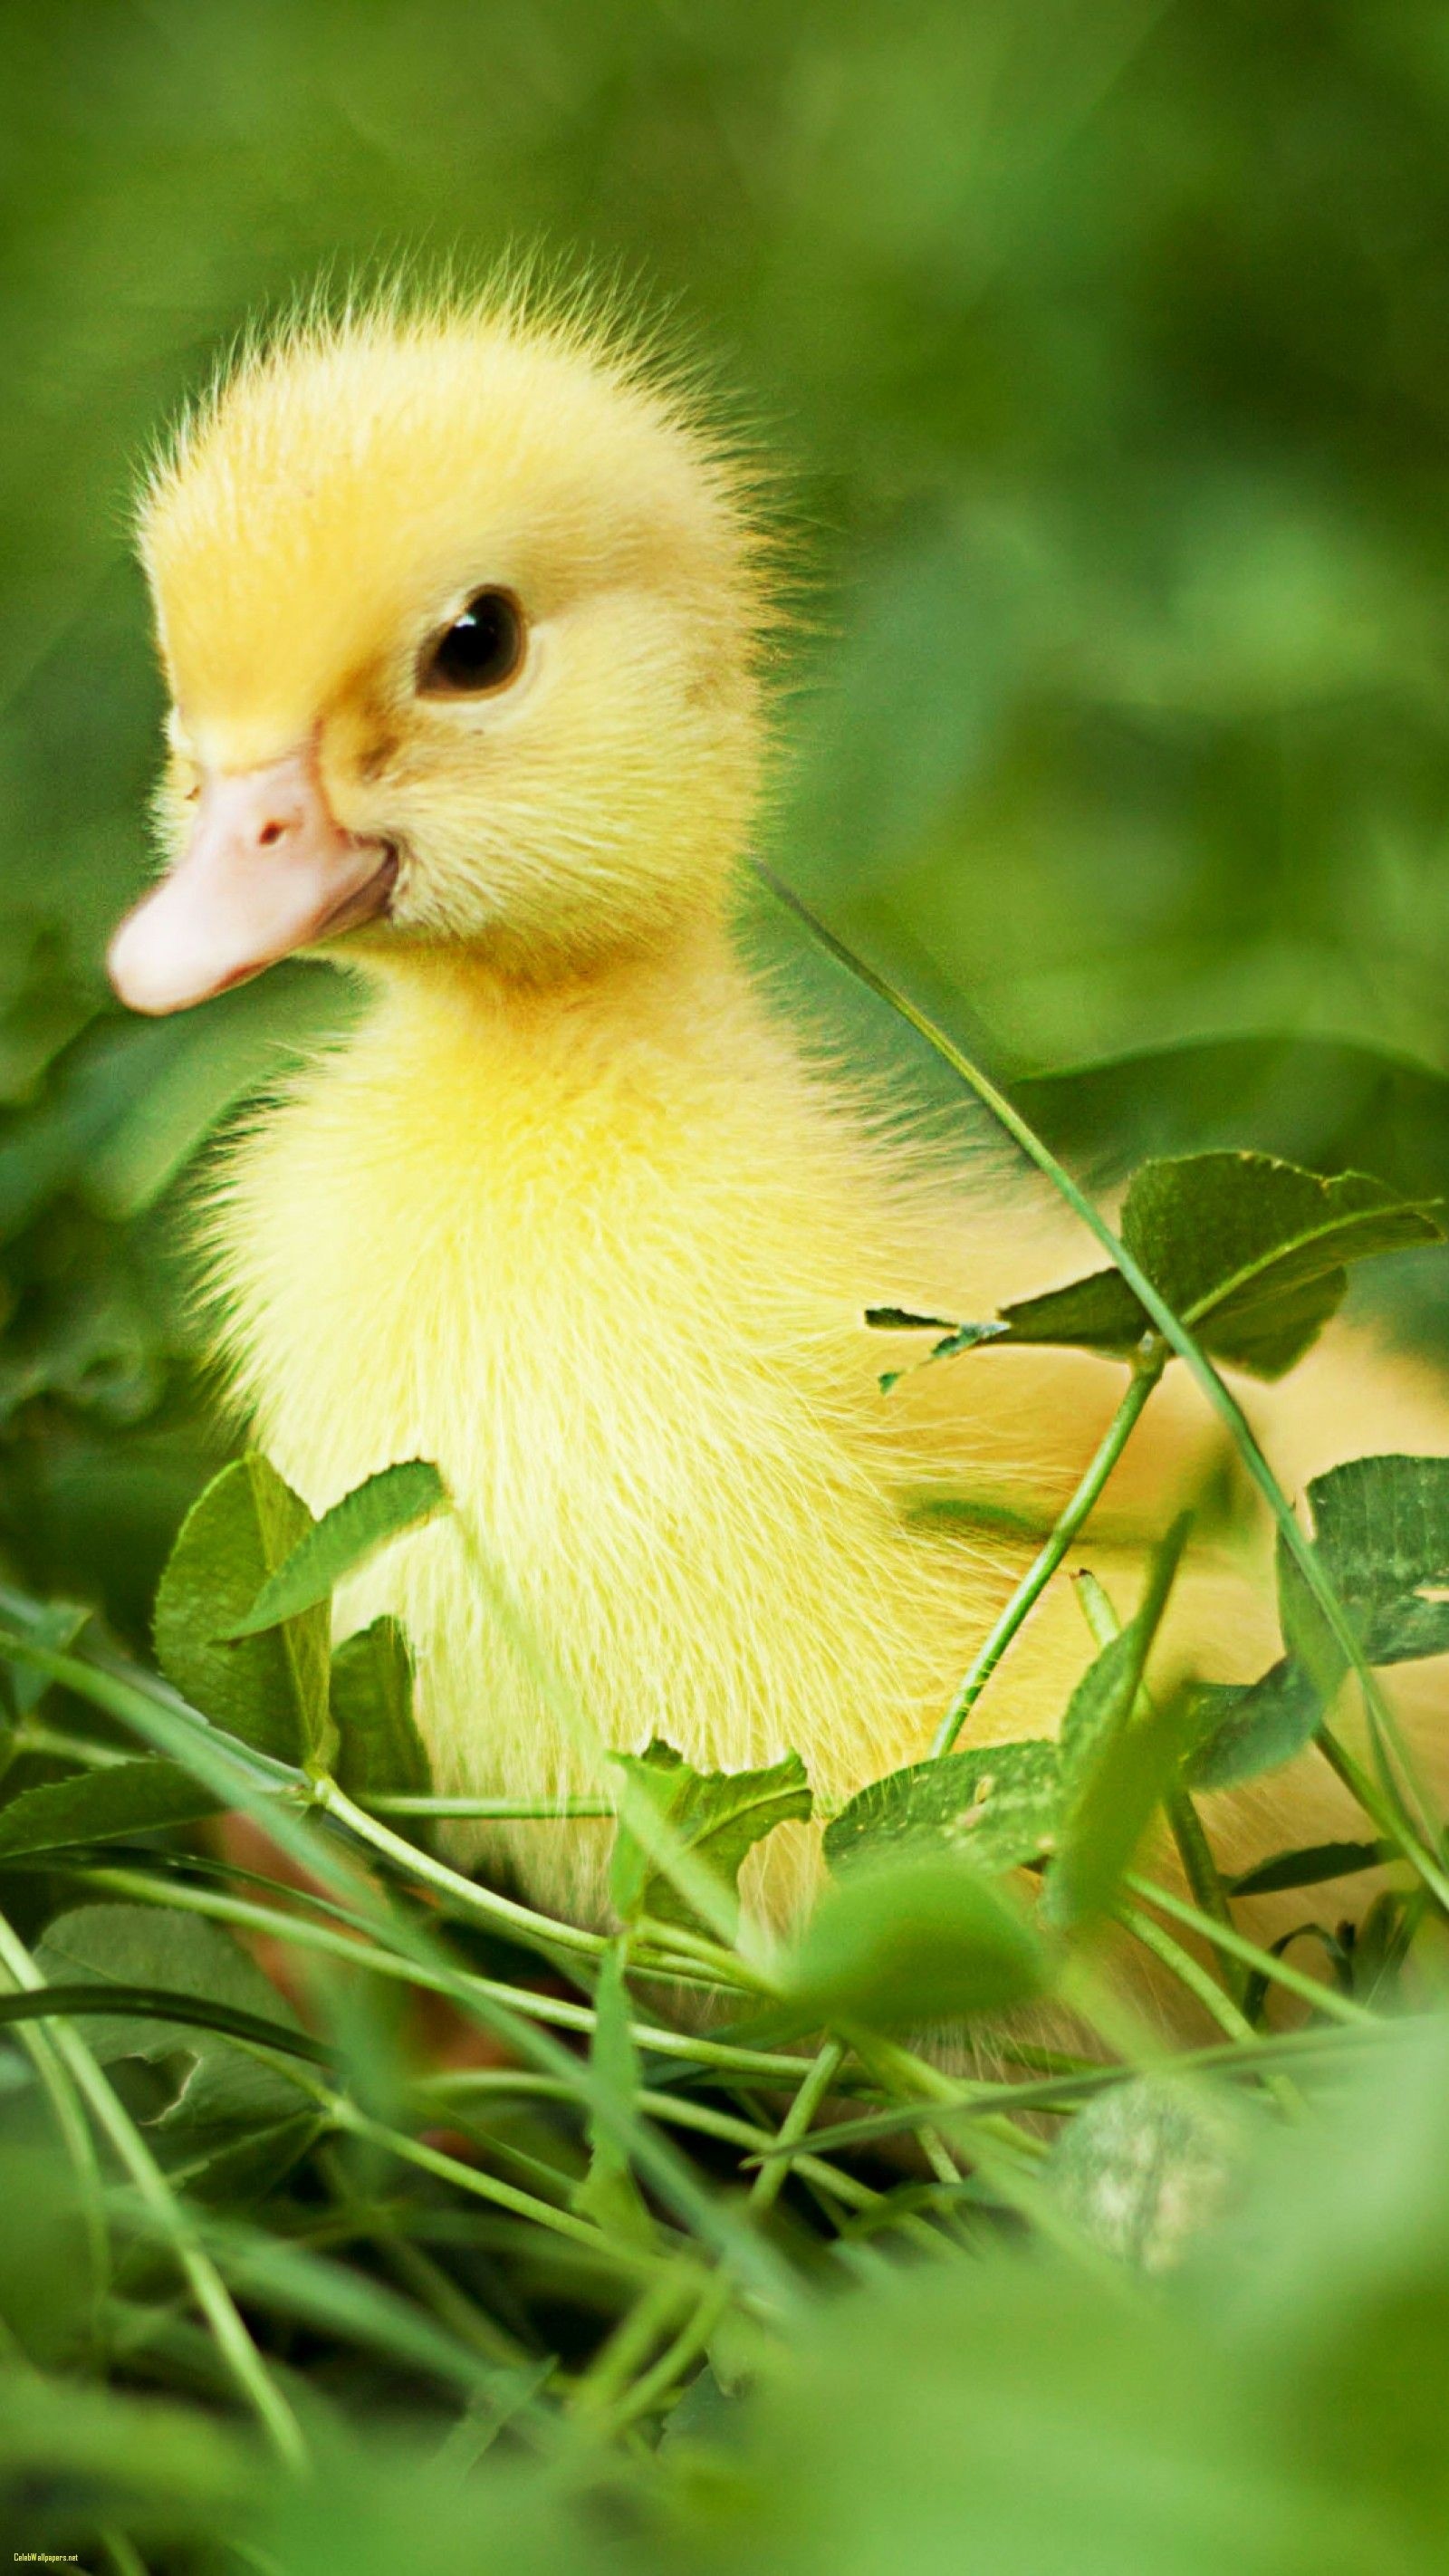 Cute duck wallpapers, Most popular, Adorable backgrounds, Irresistible charm, 1600x2850 HD Phone